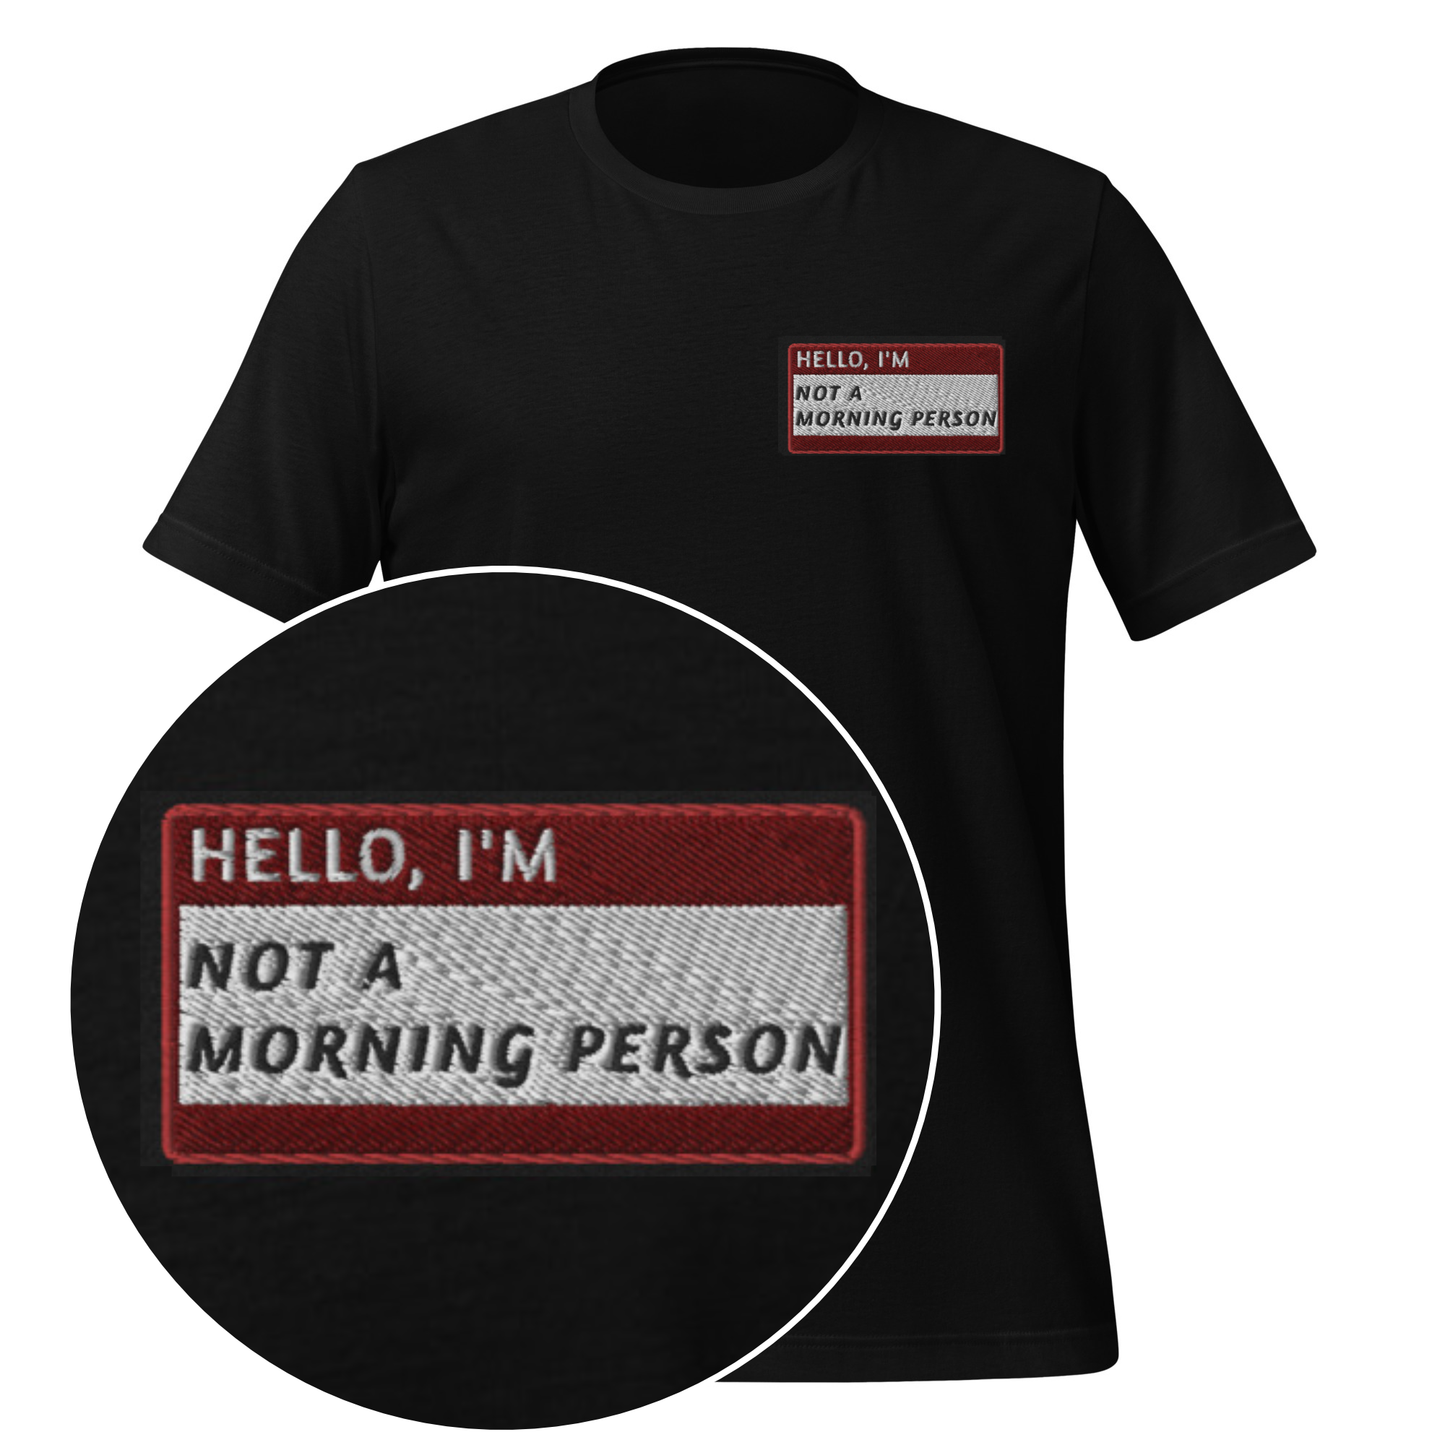 HELLO I'M NOT A MORNING PERSON- Name Tag T-Shirt